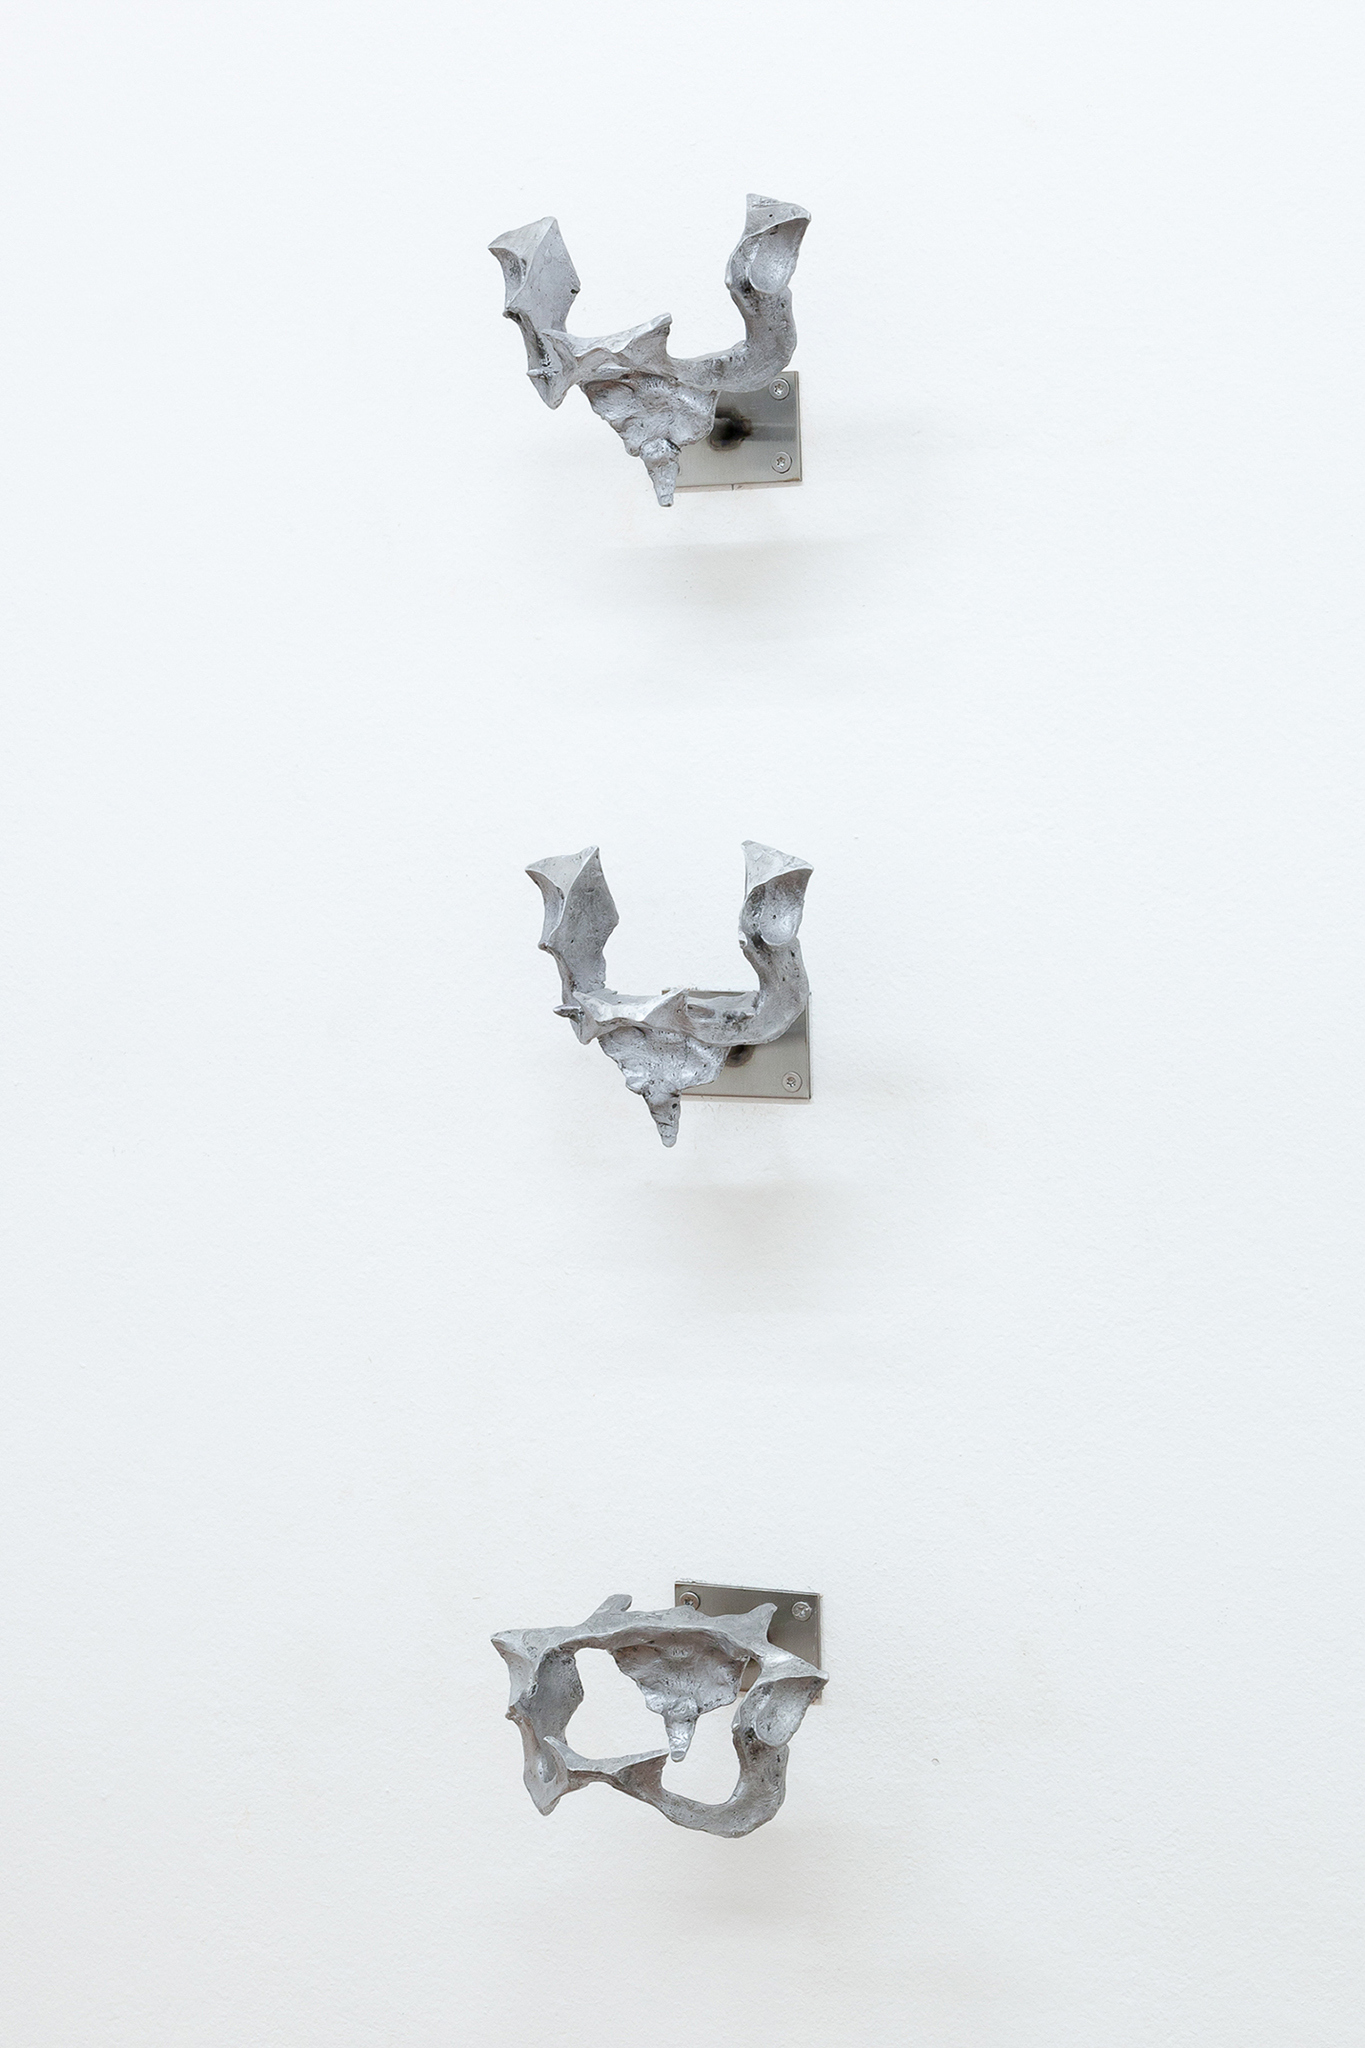 Ellie Hunter, Khora I â€“ III, 2021. Cast aluminum and stainless steel. Exhibition view, Loggia. Photo: Flavio Palasciano.